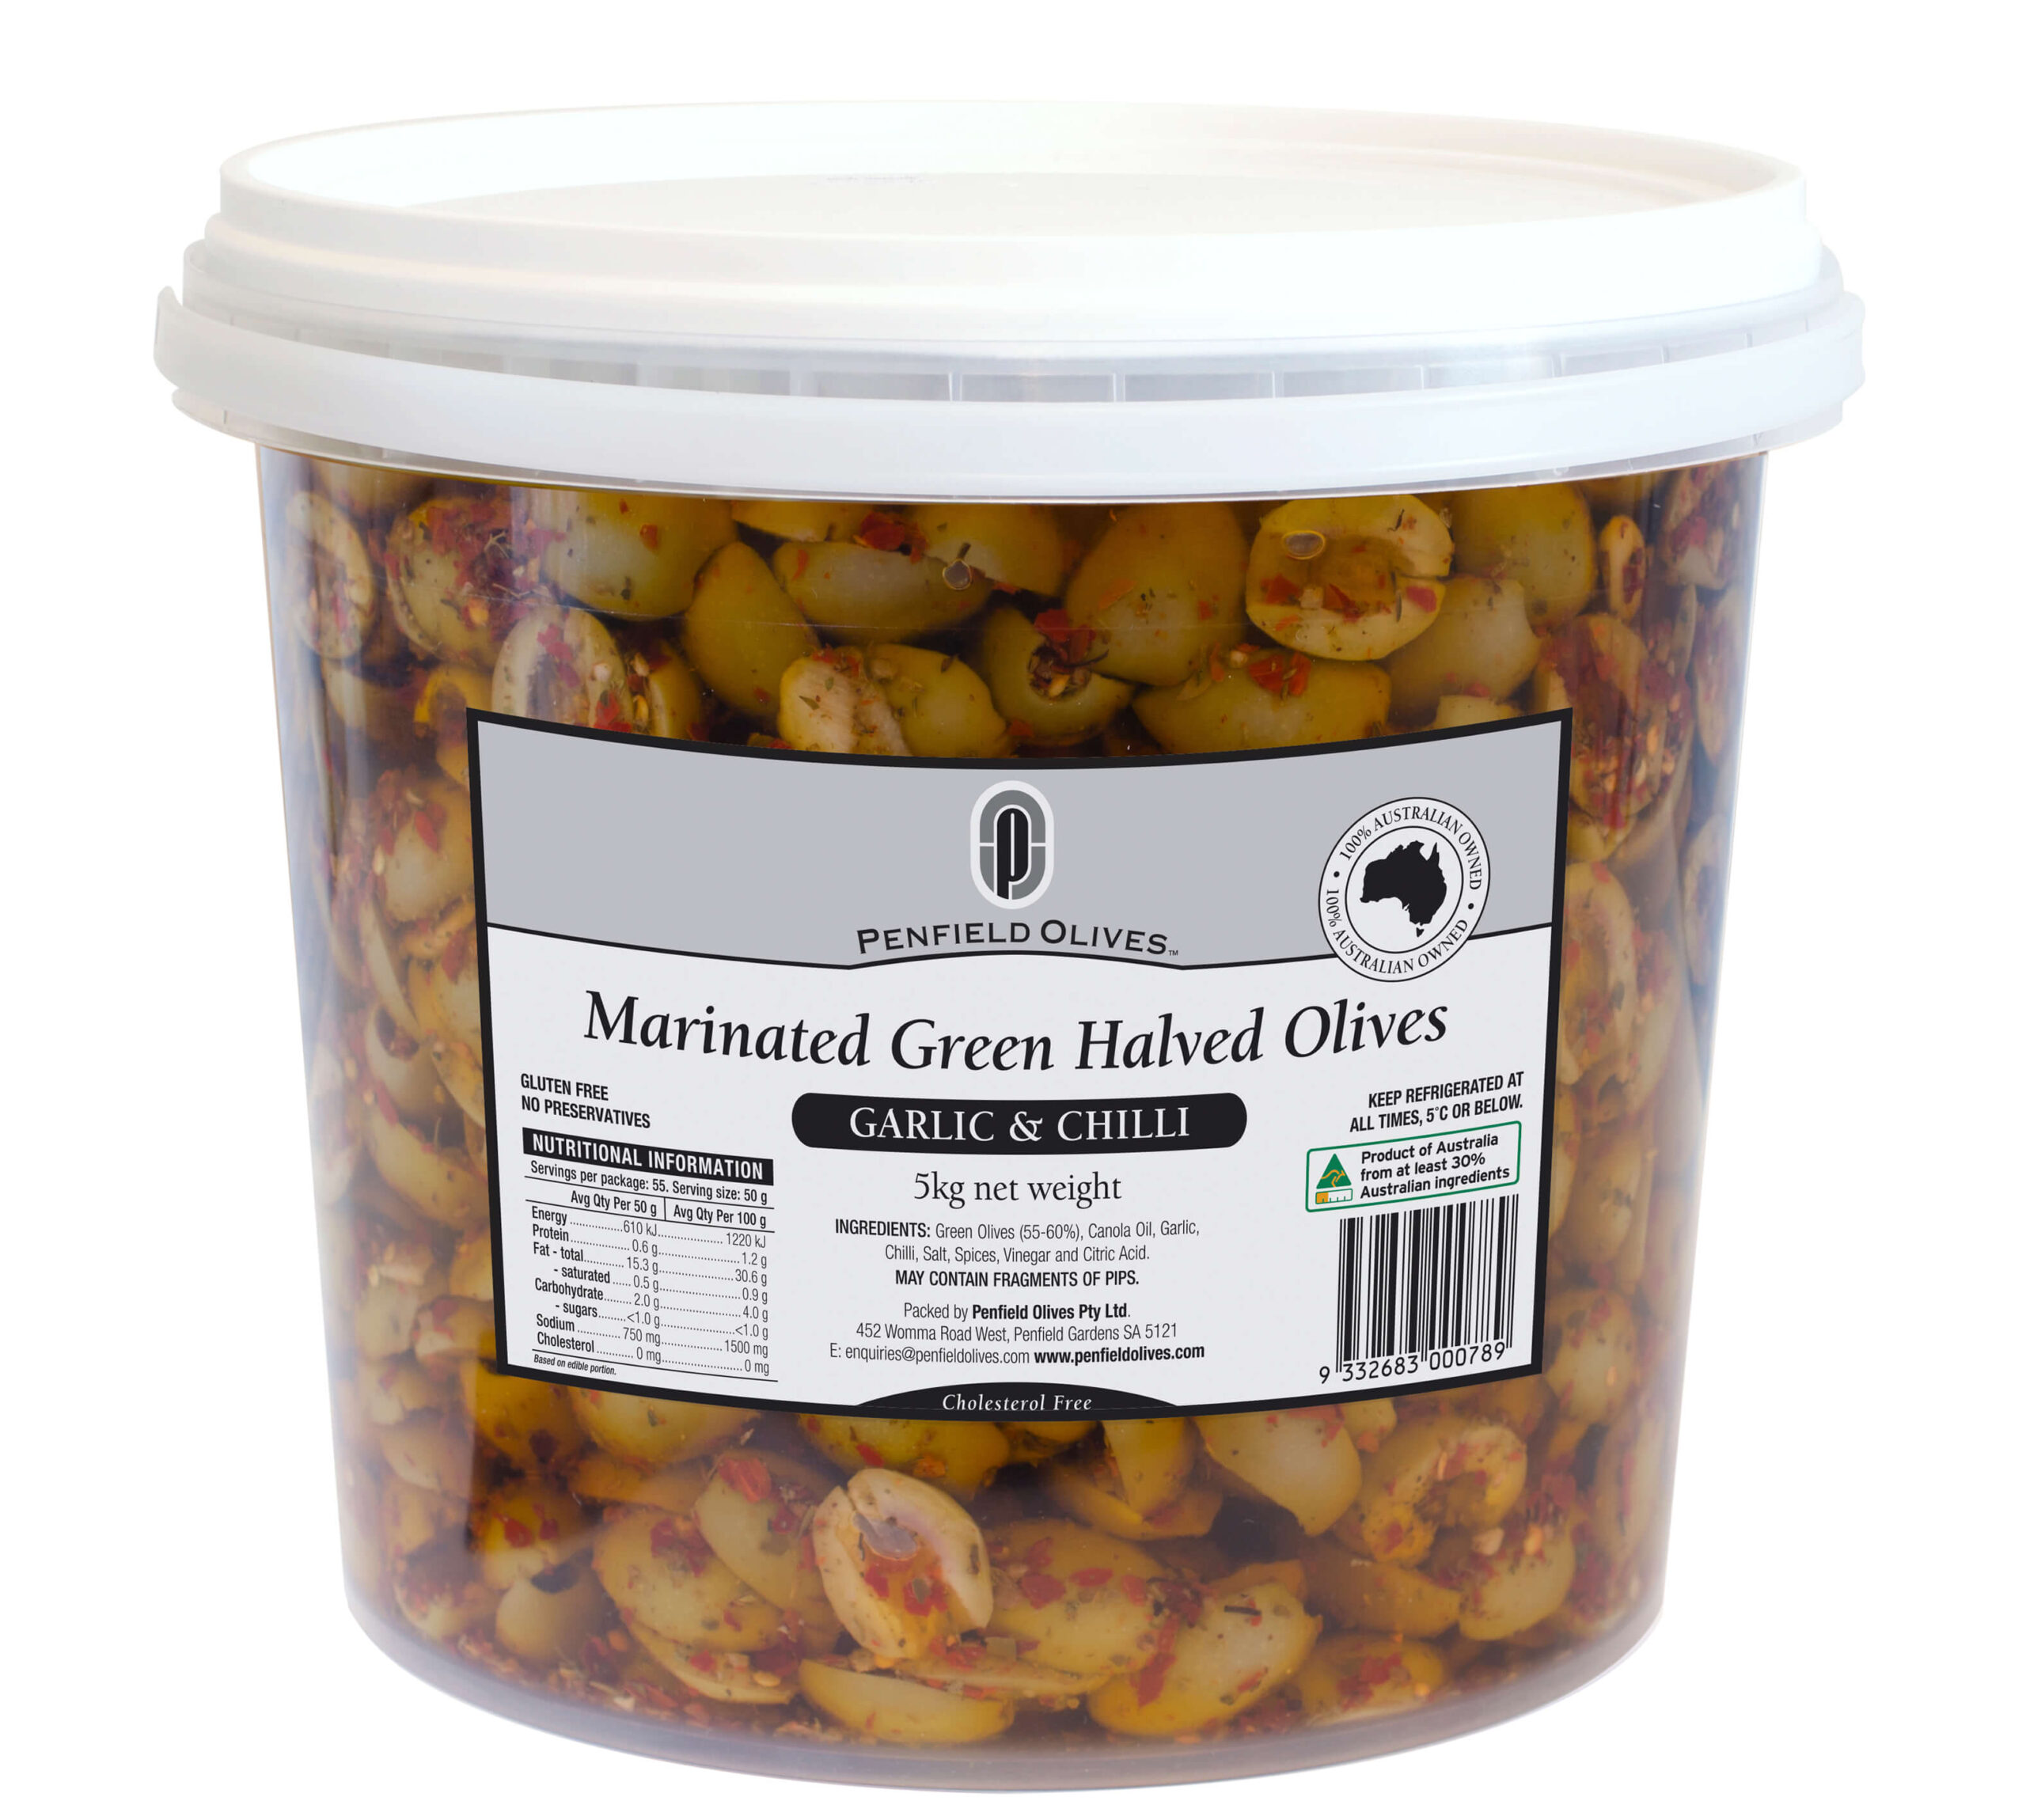 Penfield Olives food service page pic, 5kg Green Marinated Halved Olives in Garlic and Chilli in a clear container with a white lid.